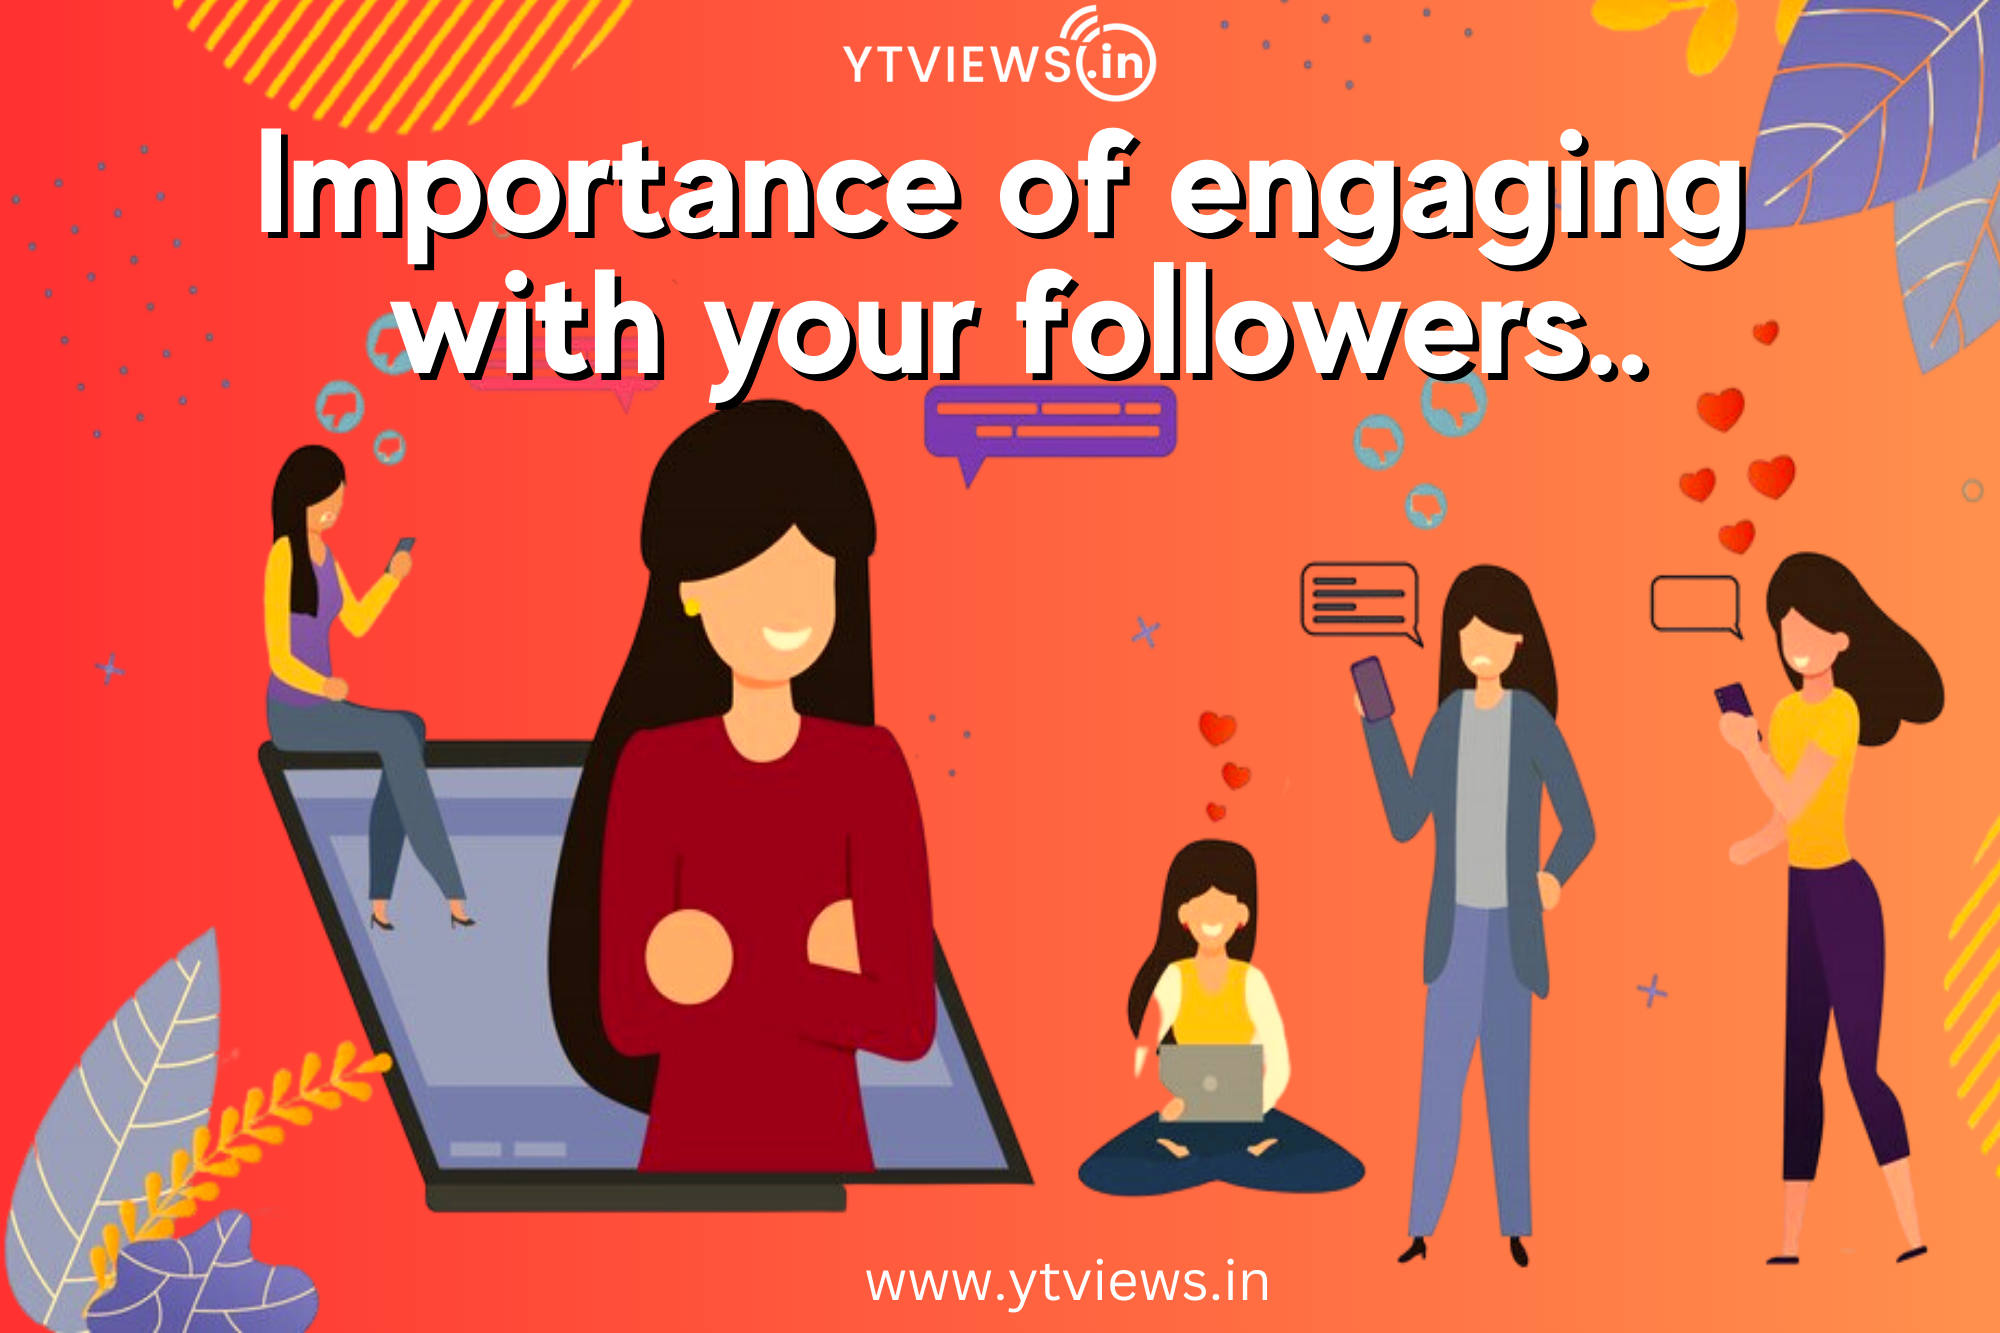 How does engaging with your followers play a crucial role in promoting your business?